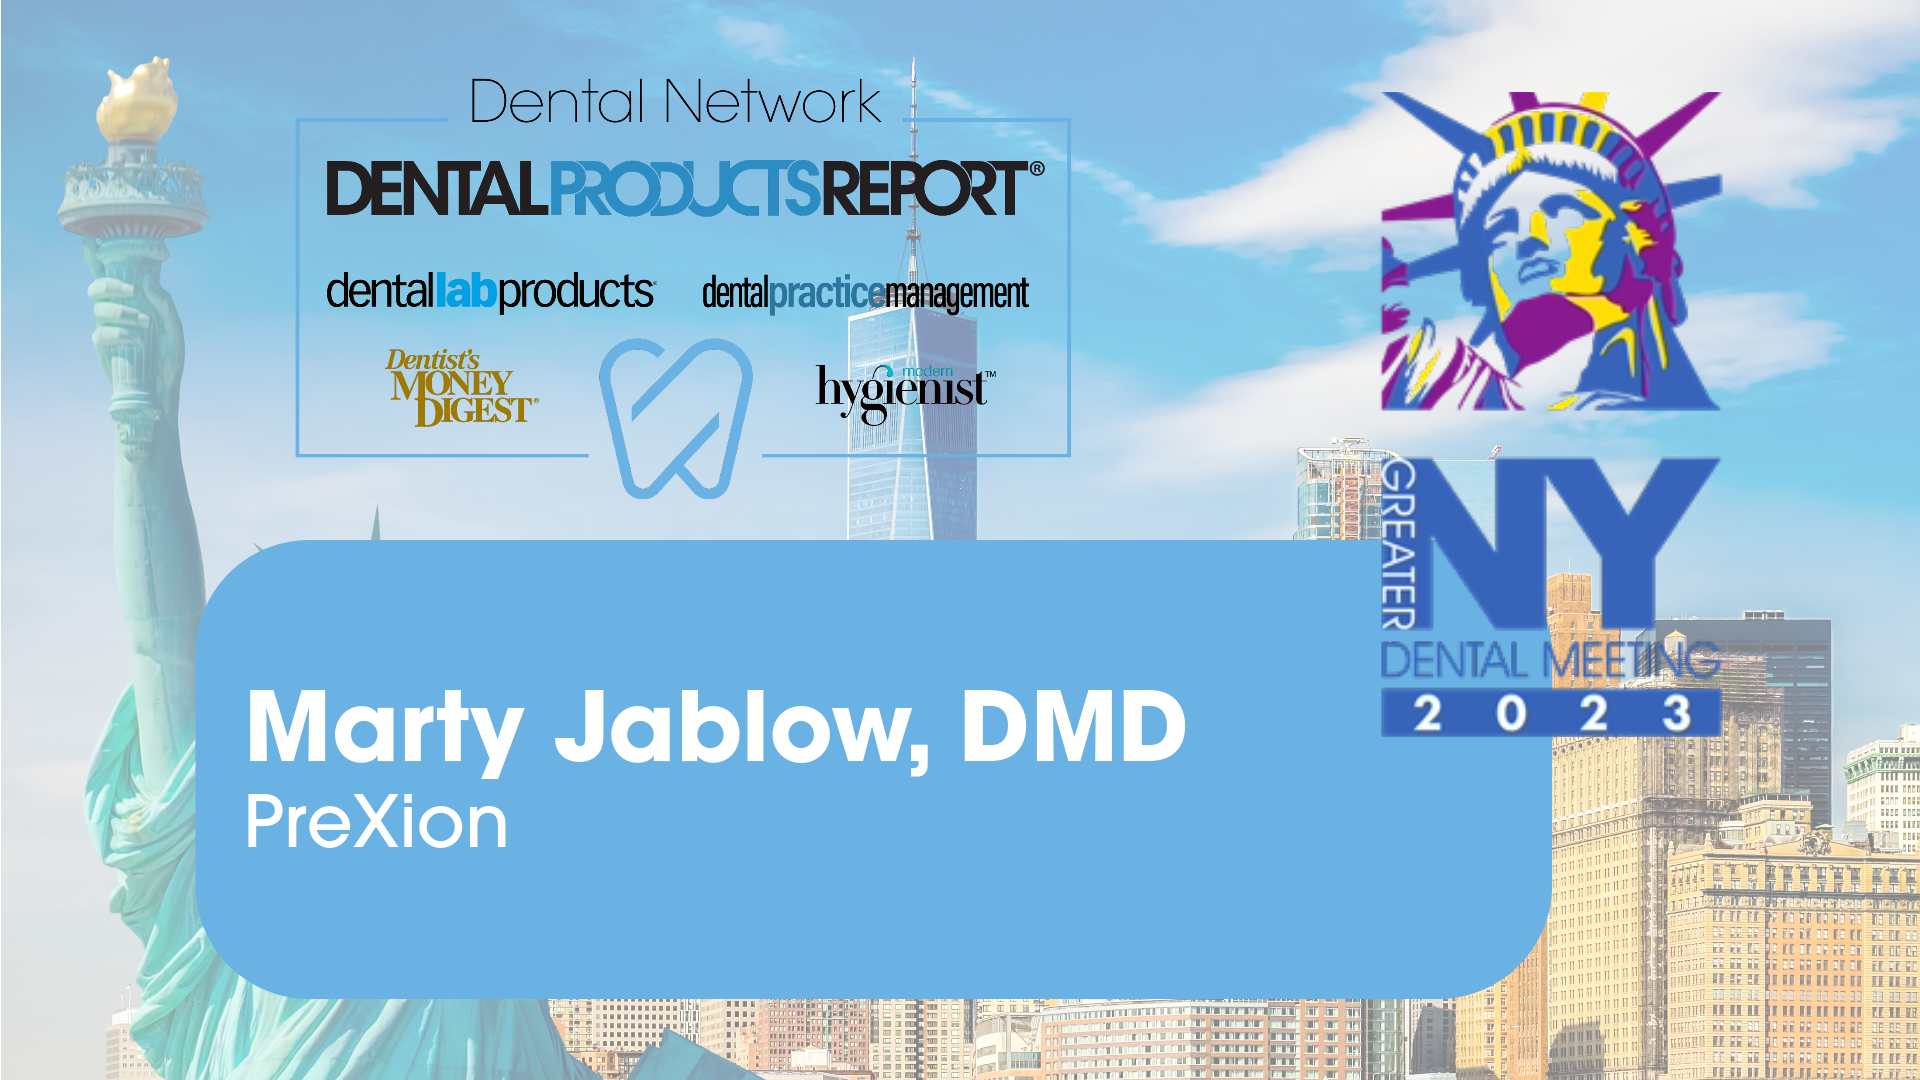 Greater New York Dental Meeting 2023 - Interview with Marty Jablow, DMD